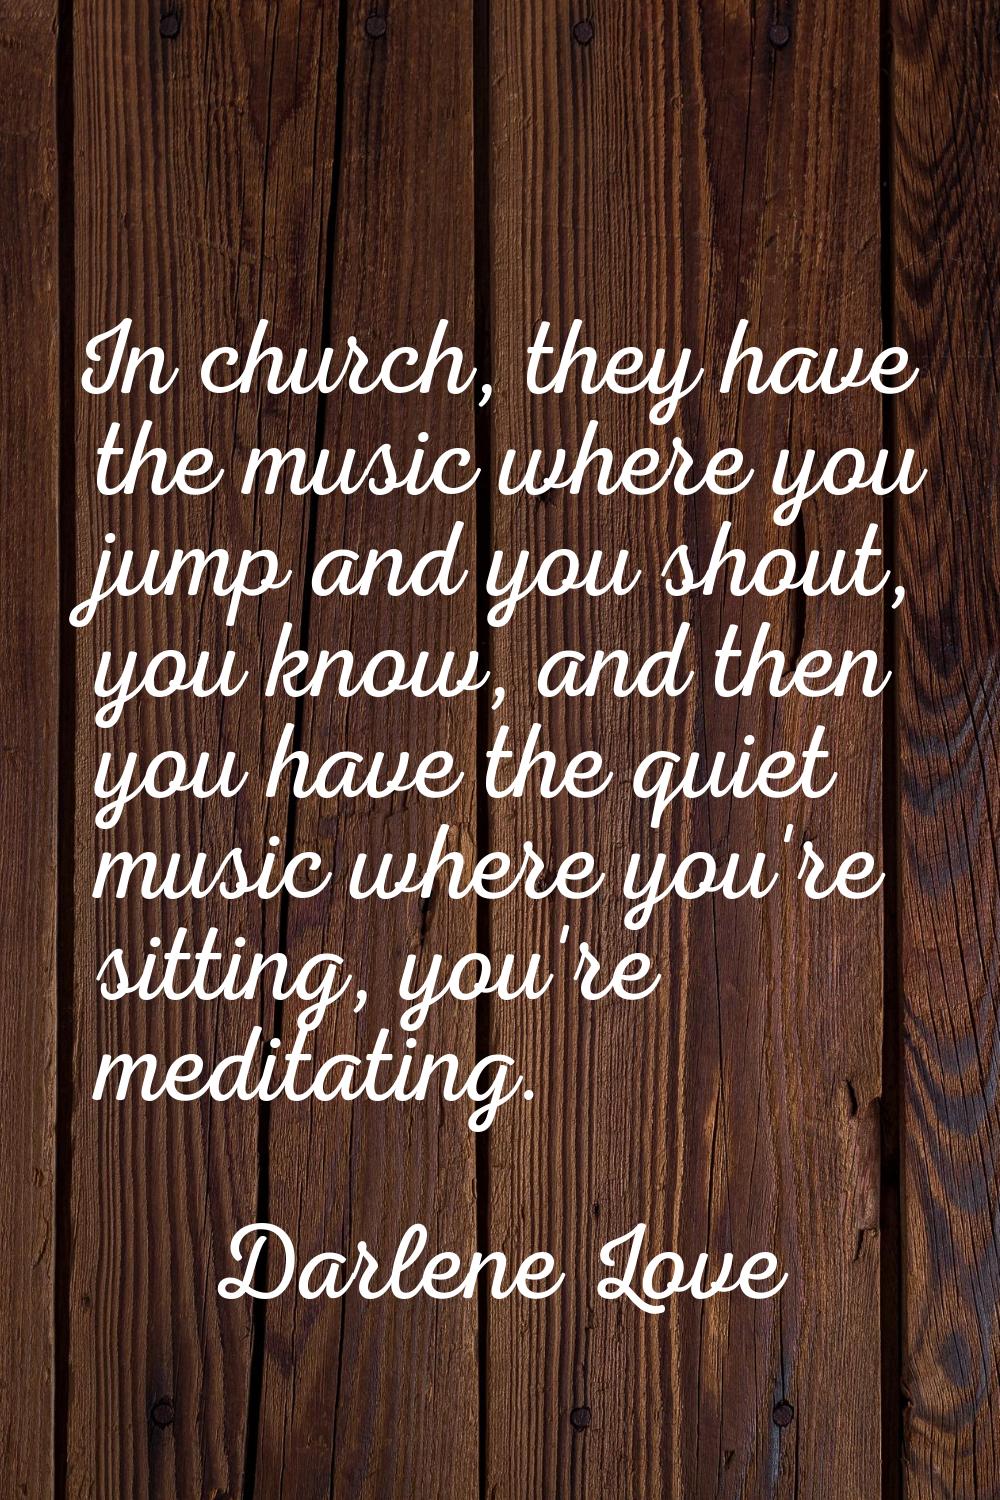 In church, they have the music where you jump and you shout, you know, and then you have the quiet 